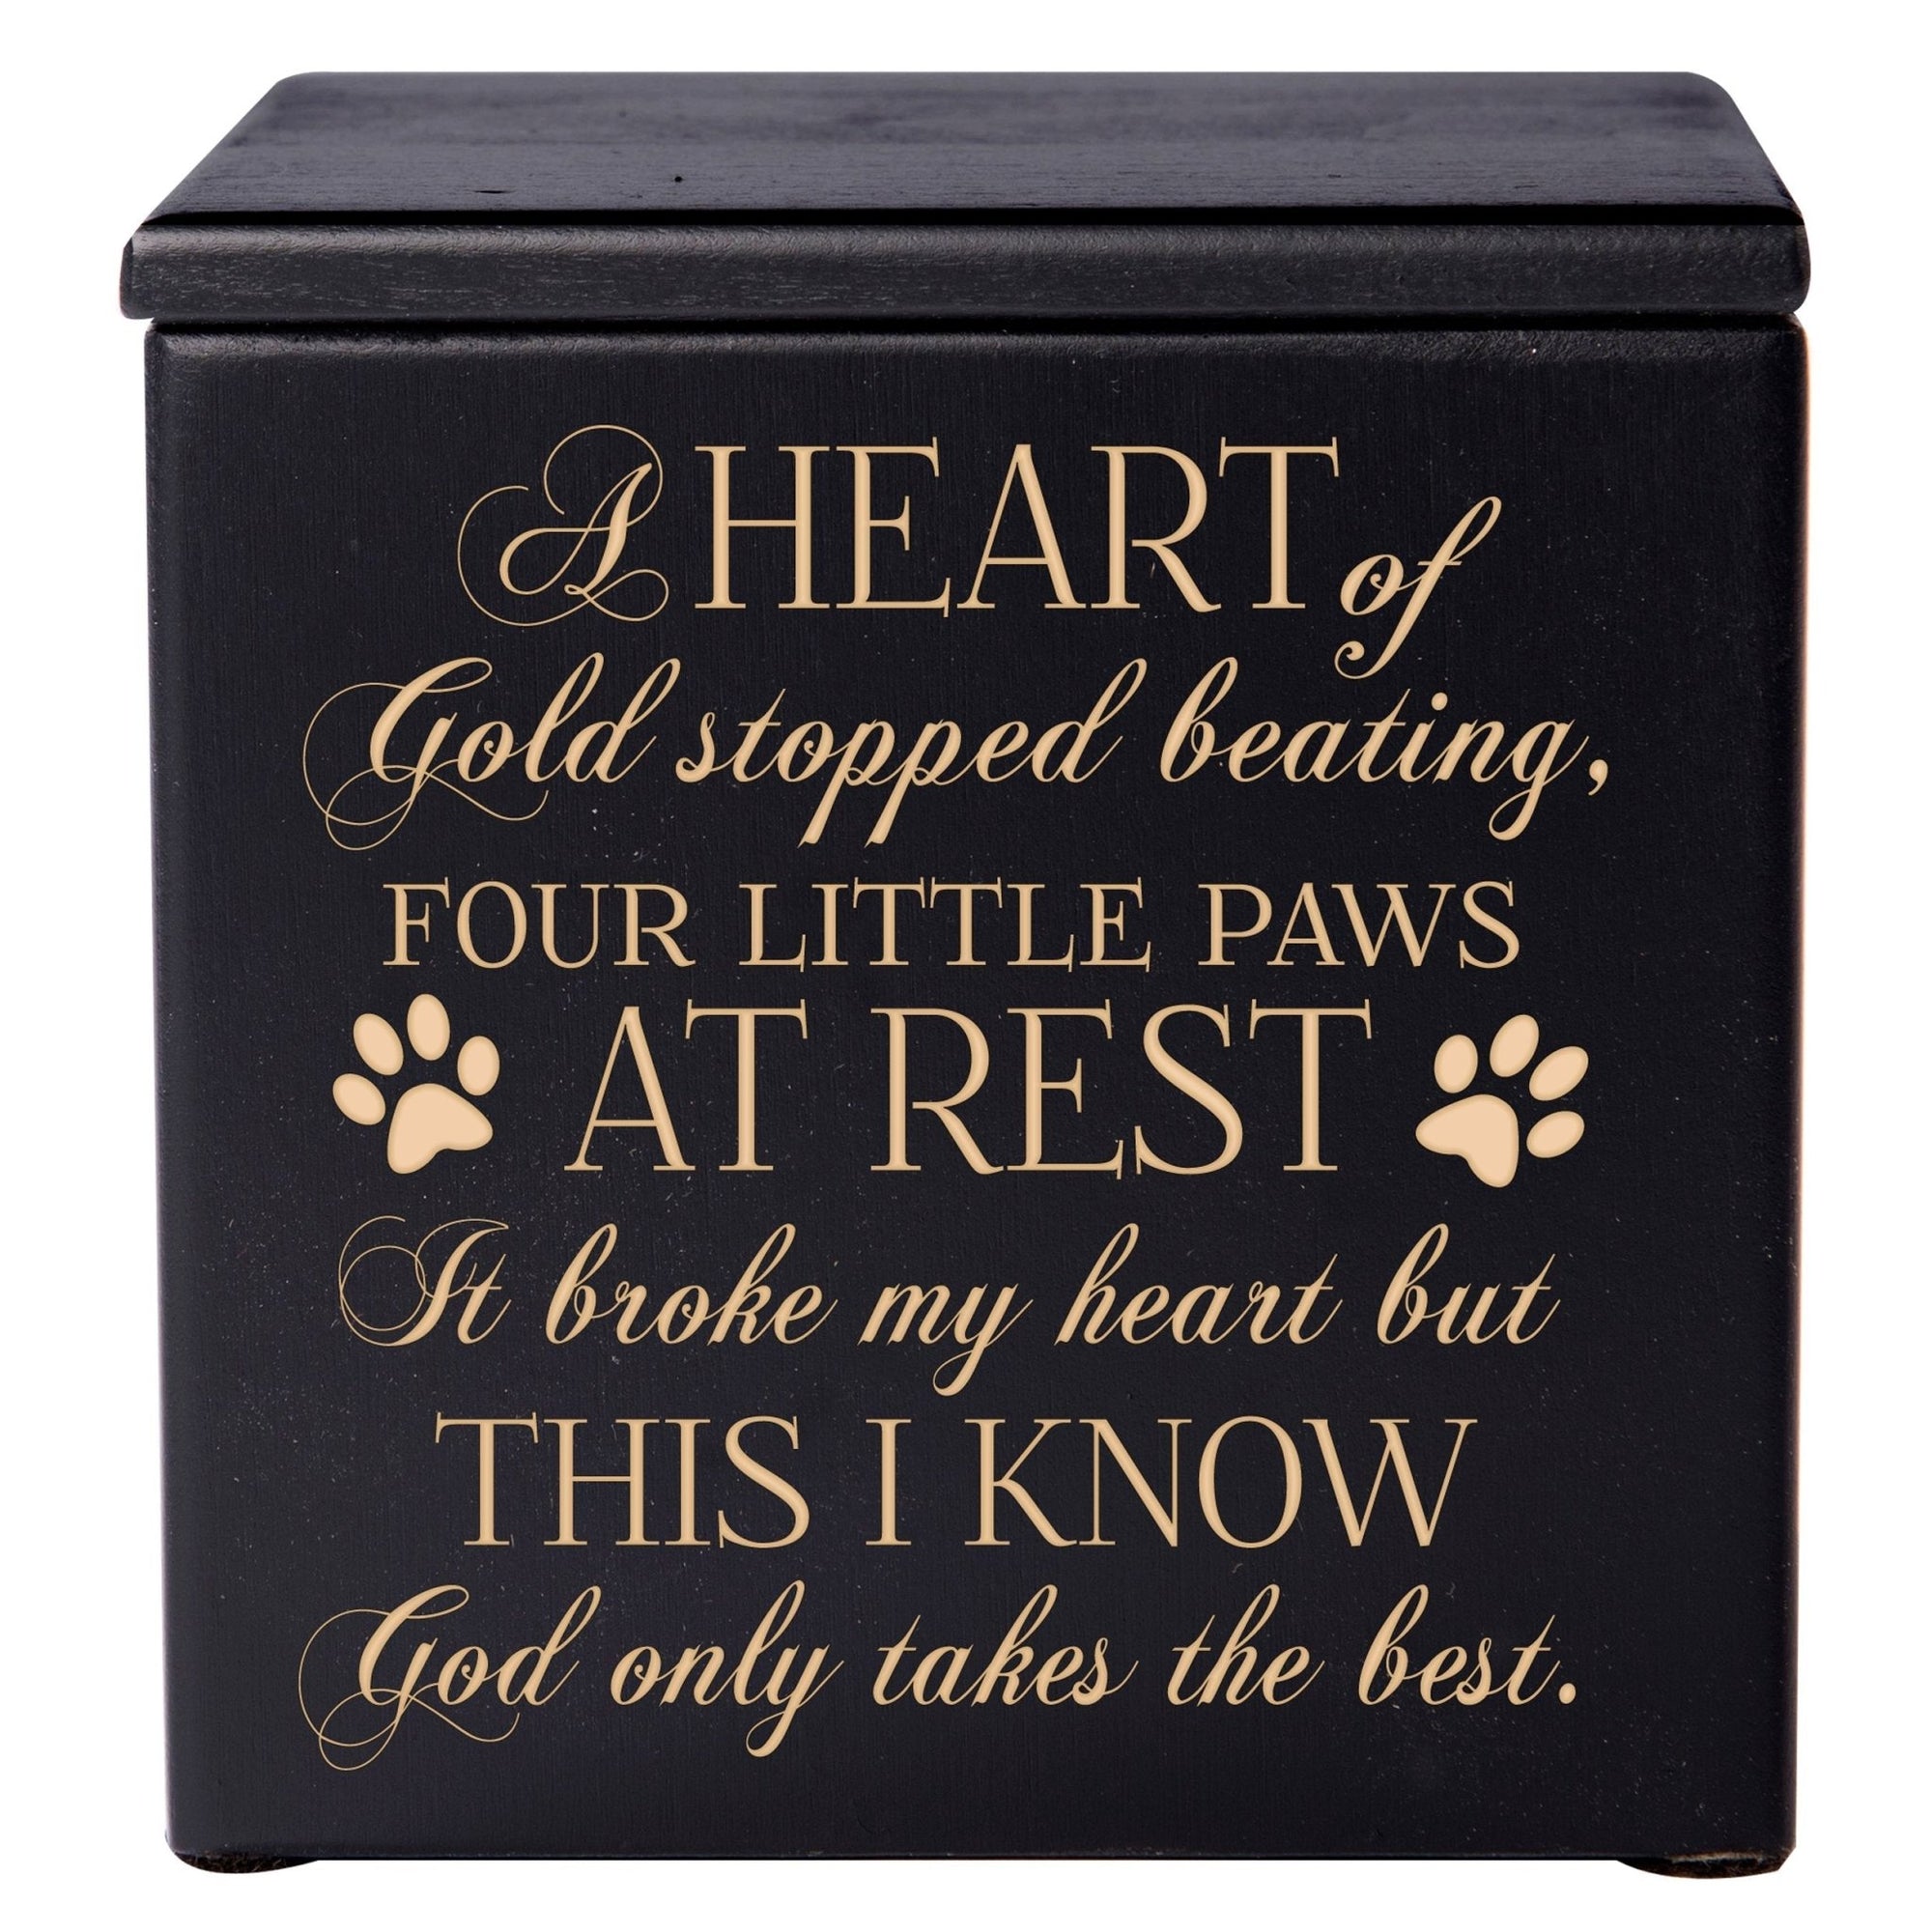 Pet Memorial Keepsake Cremation Urn Box for Dog or Cat - A Heart of Gold - LifeSong Milestones